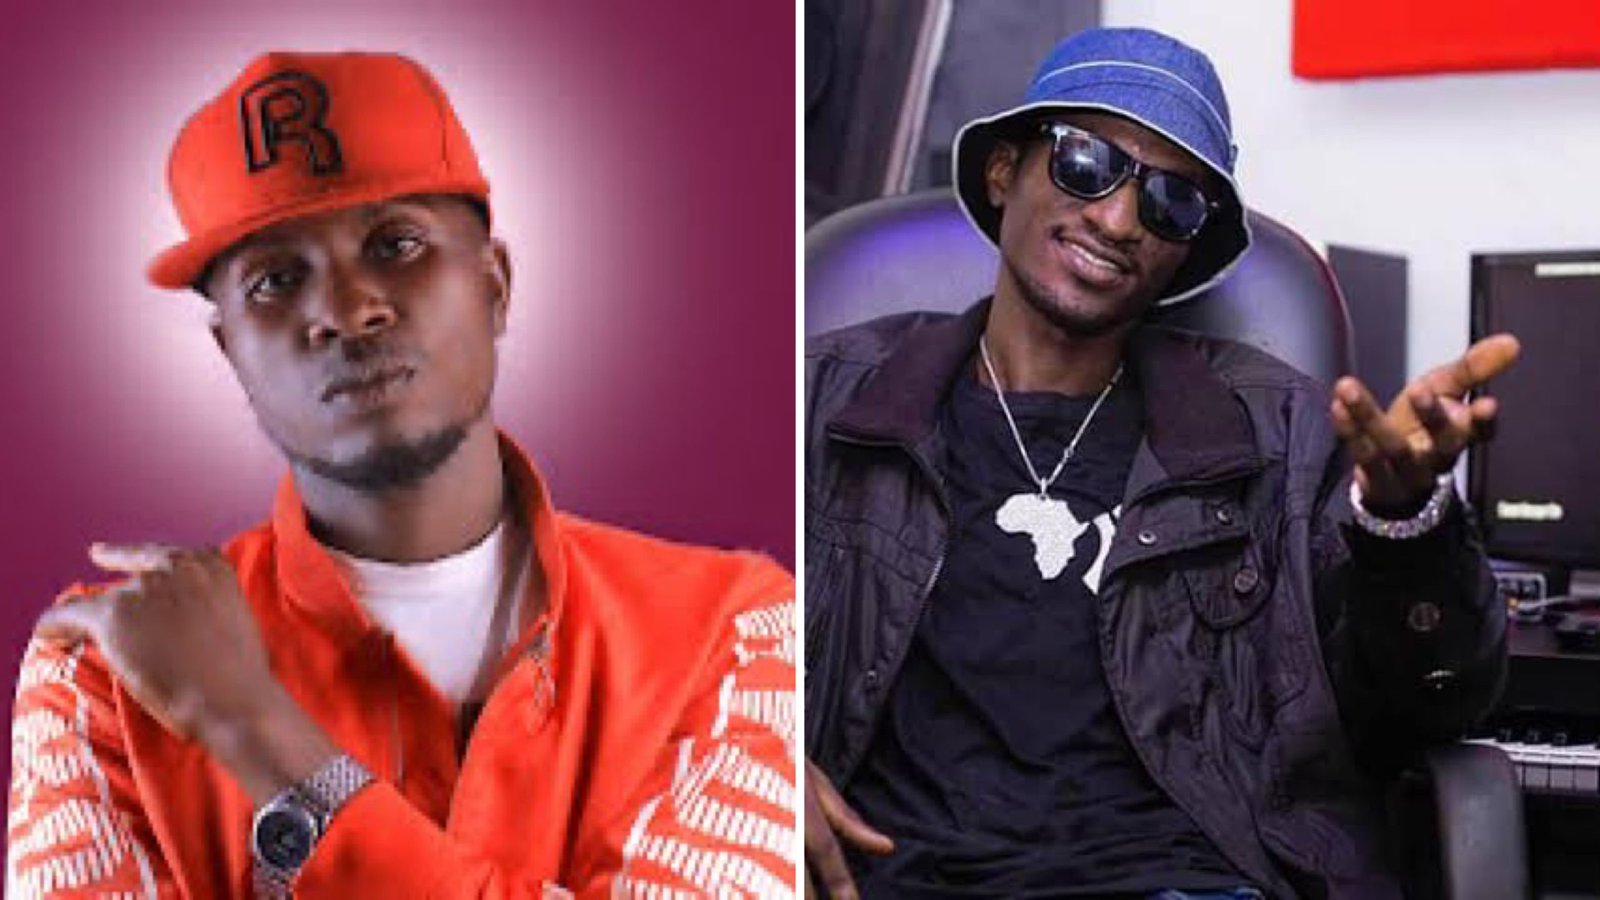 upcoming-artist-wire-wire-bwongo-claims-assault-by-producer-d’mario,-left-with-swollen-lips-and-broken-teeth-(watch)